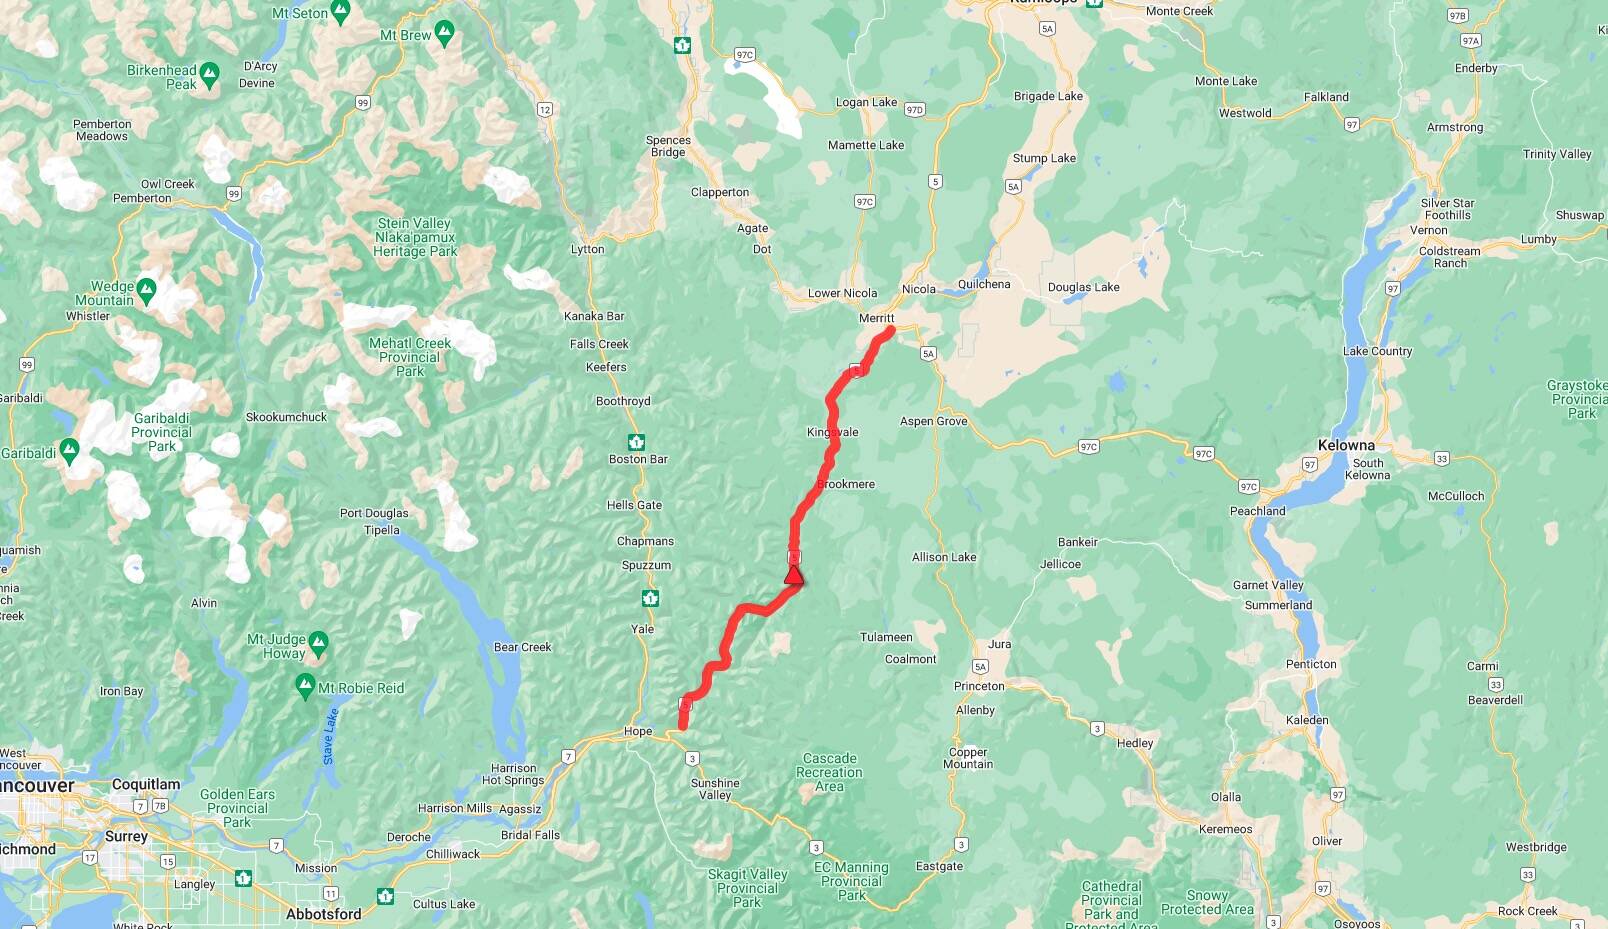 Drive BC map of incident